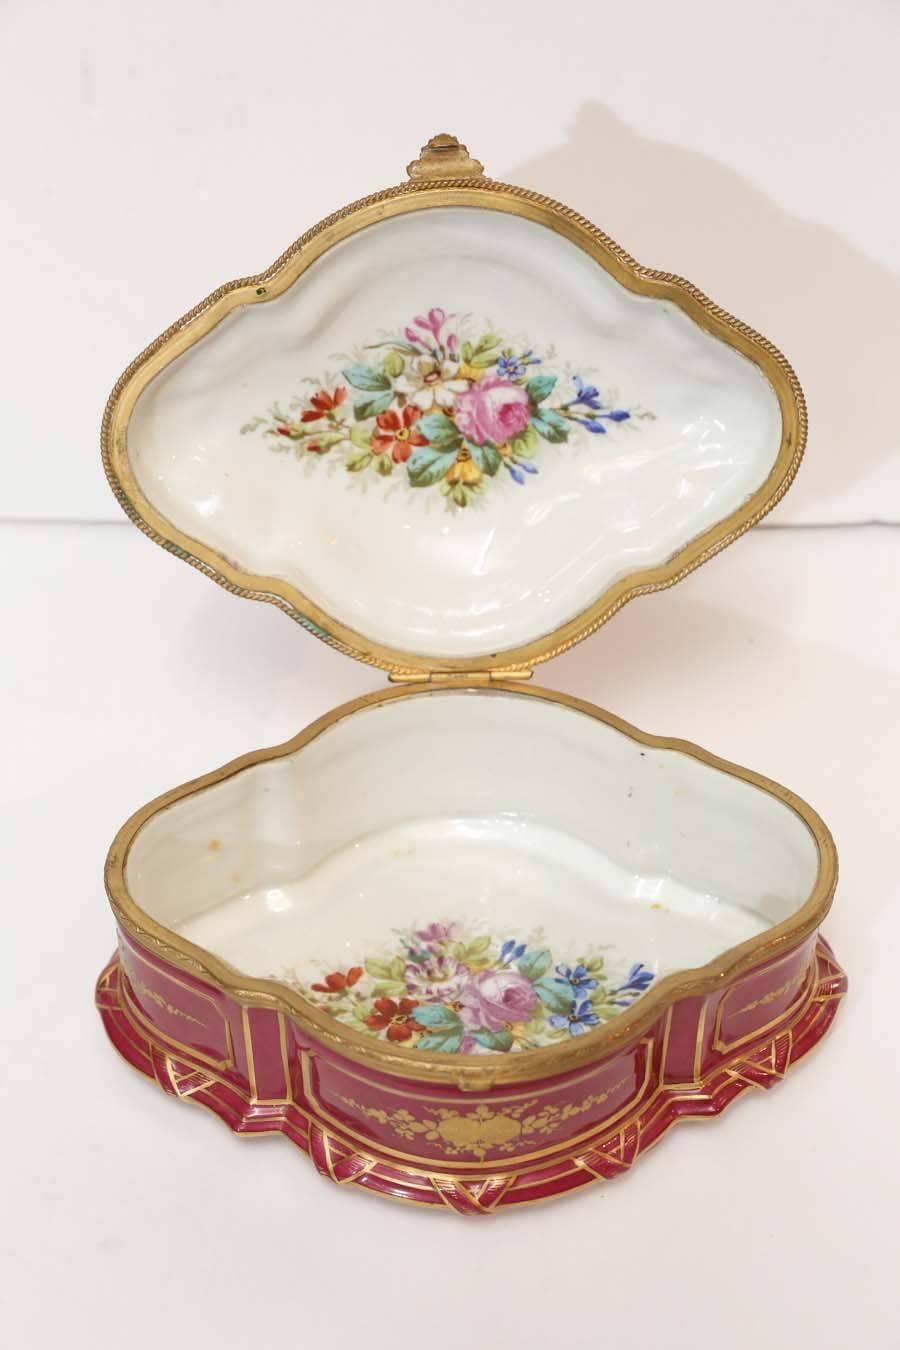 19th century French Sevres porcelain box.
In cranberry color with painted garden scene.
Oval in shape with gilt painted designs on all sides.
 